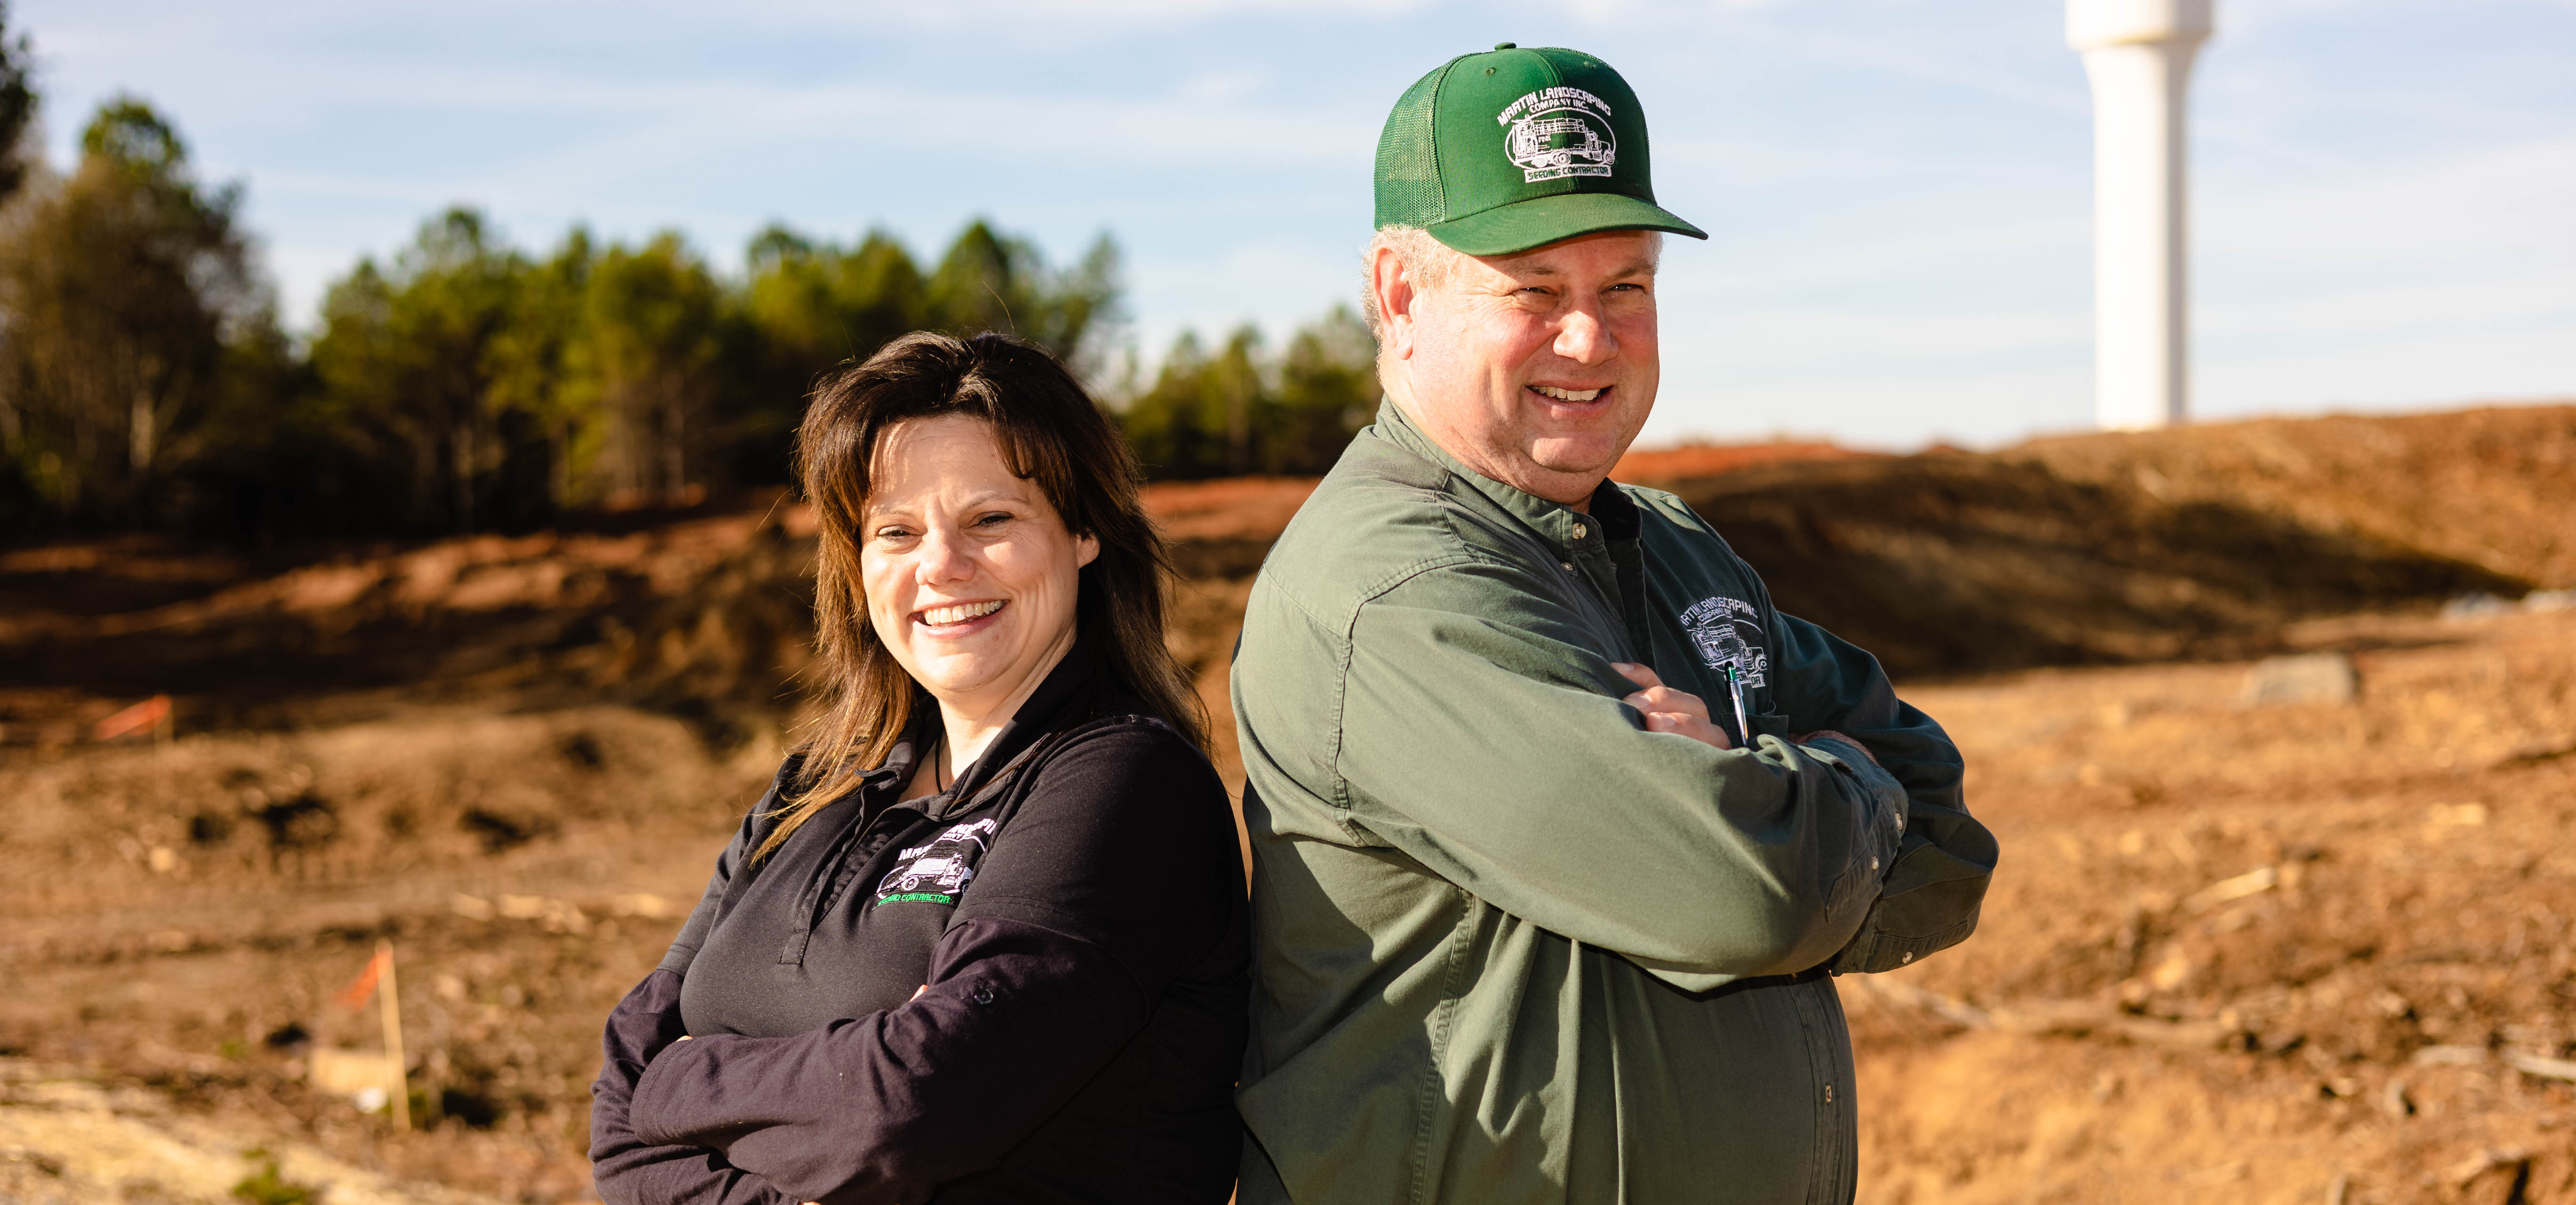 Lisa Markus (left) and David Martin (right) pose back to back with their arms crossed smiling big, behind them is a dirt field and the CLT FAA Tower miles away